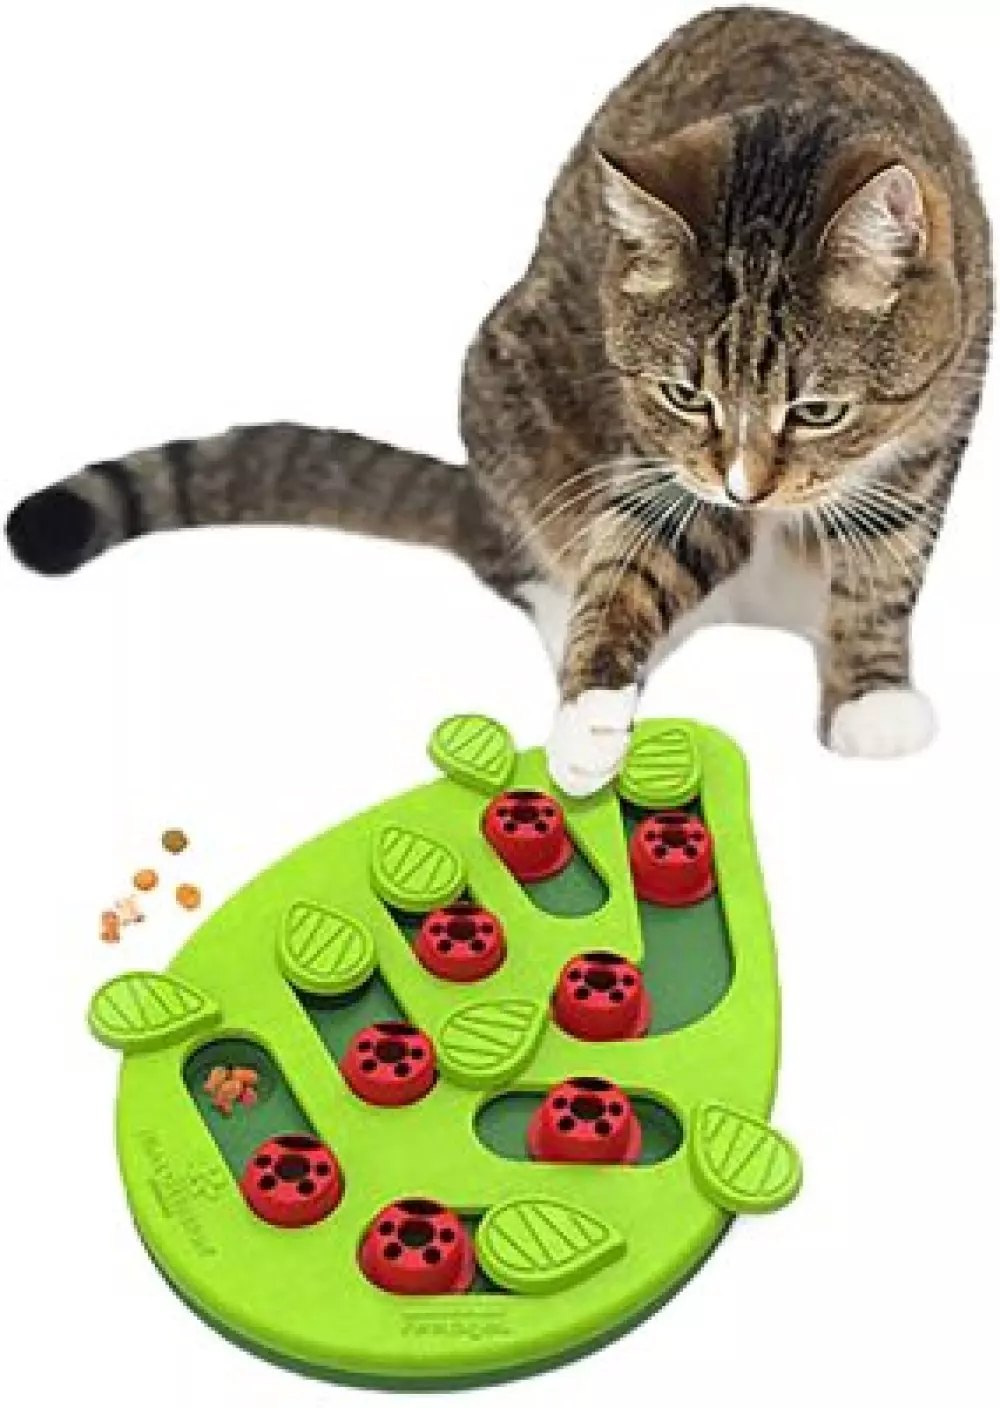 CAT PUZZLE & PLAY BUGGIN OUT, 700603694797, Katteutstyr, Katteleker, Imazo AB, PETSTAGES CAT PUZZLE & PLAY BUGGIN OUT